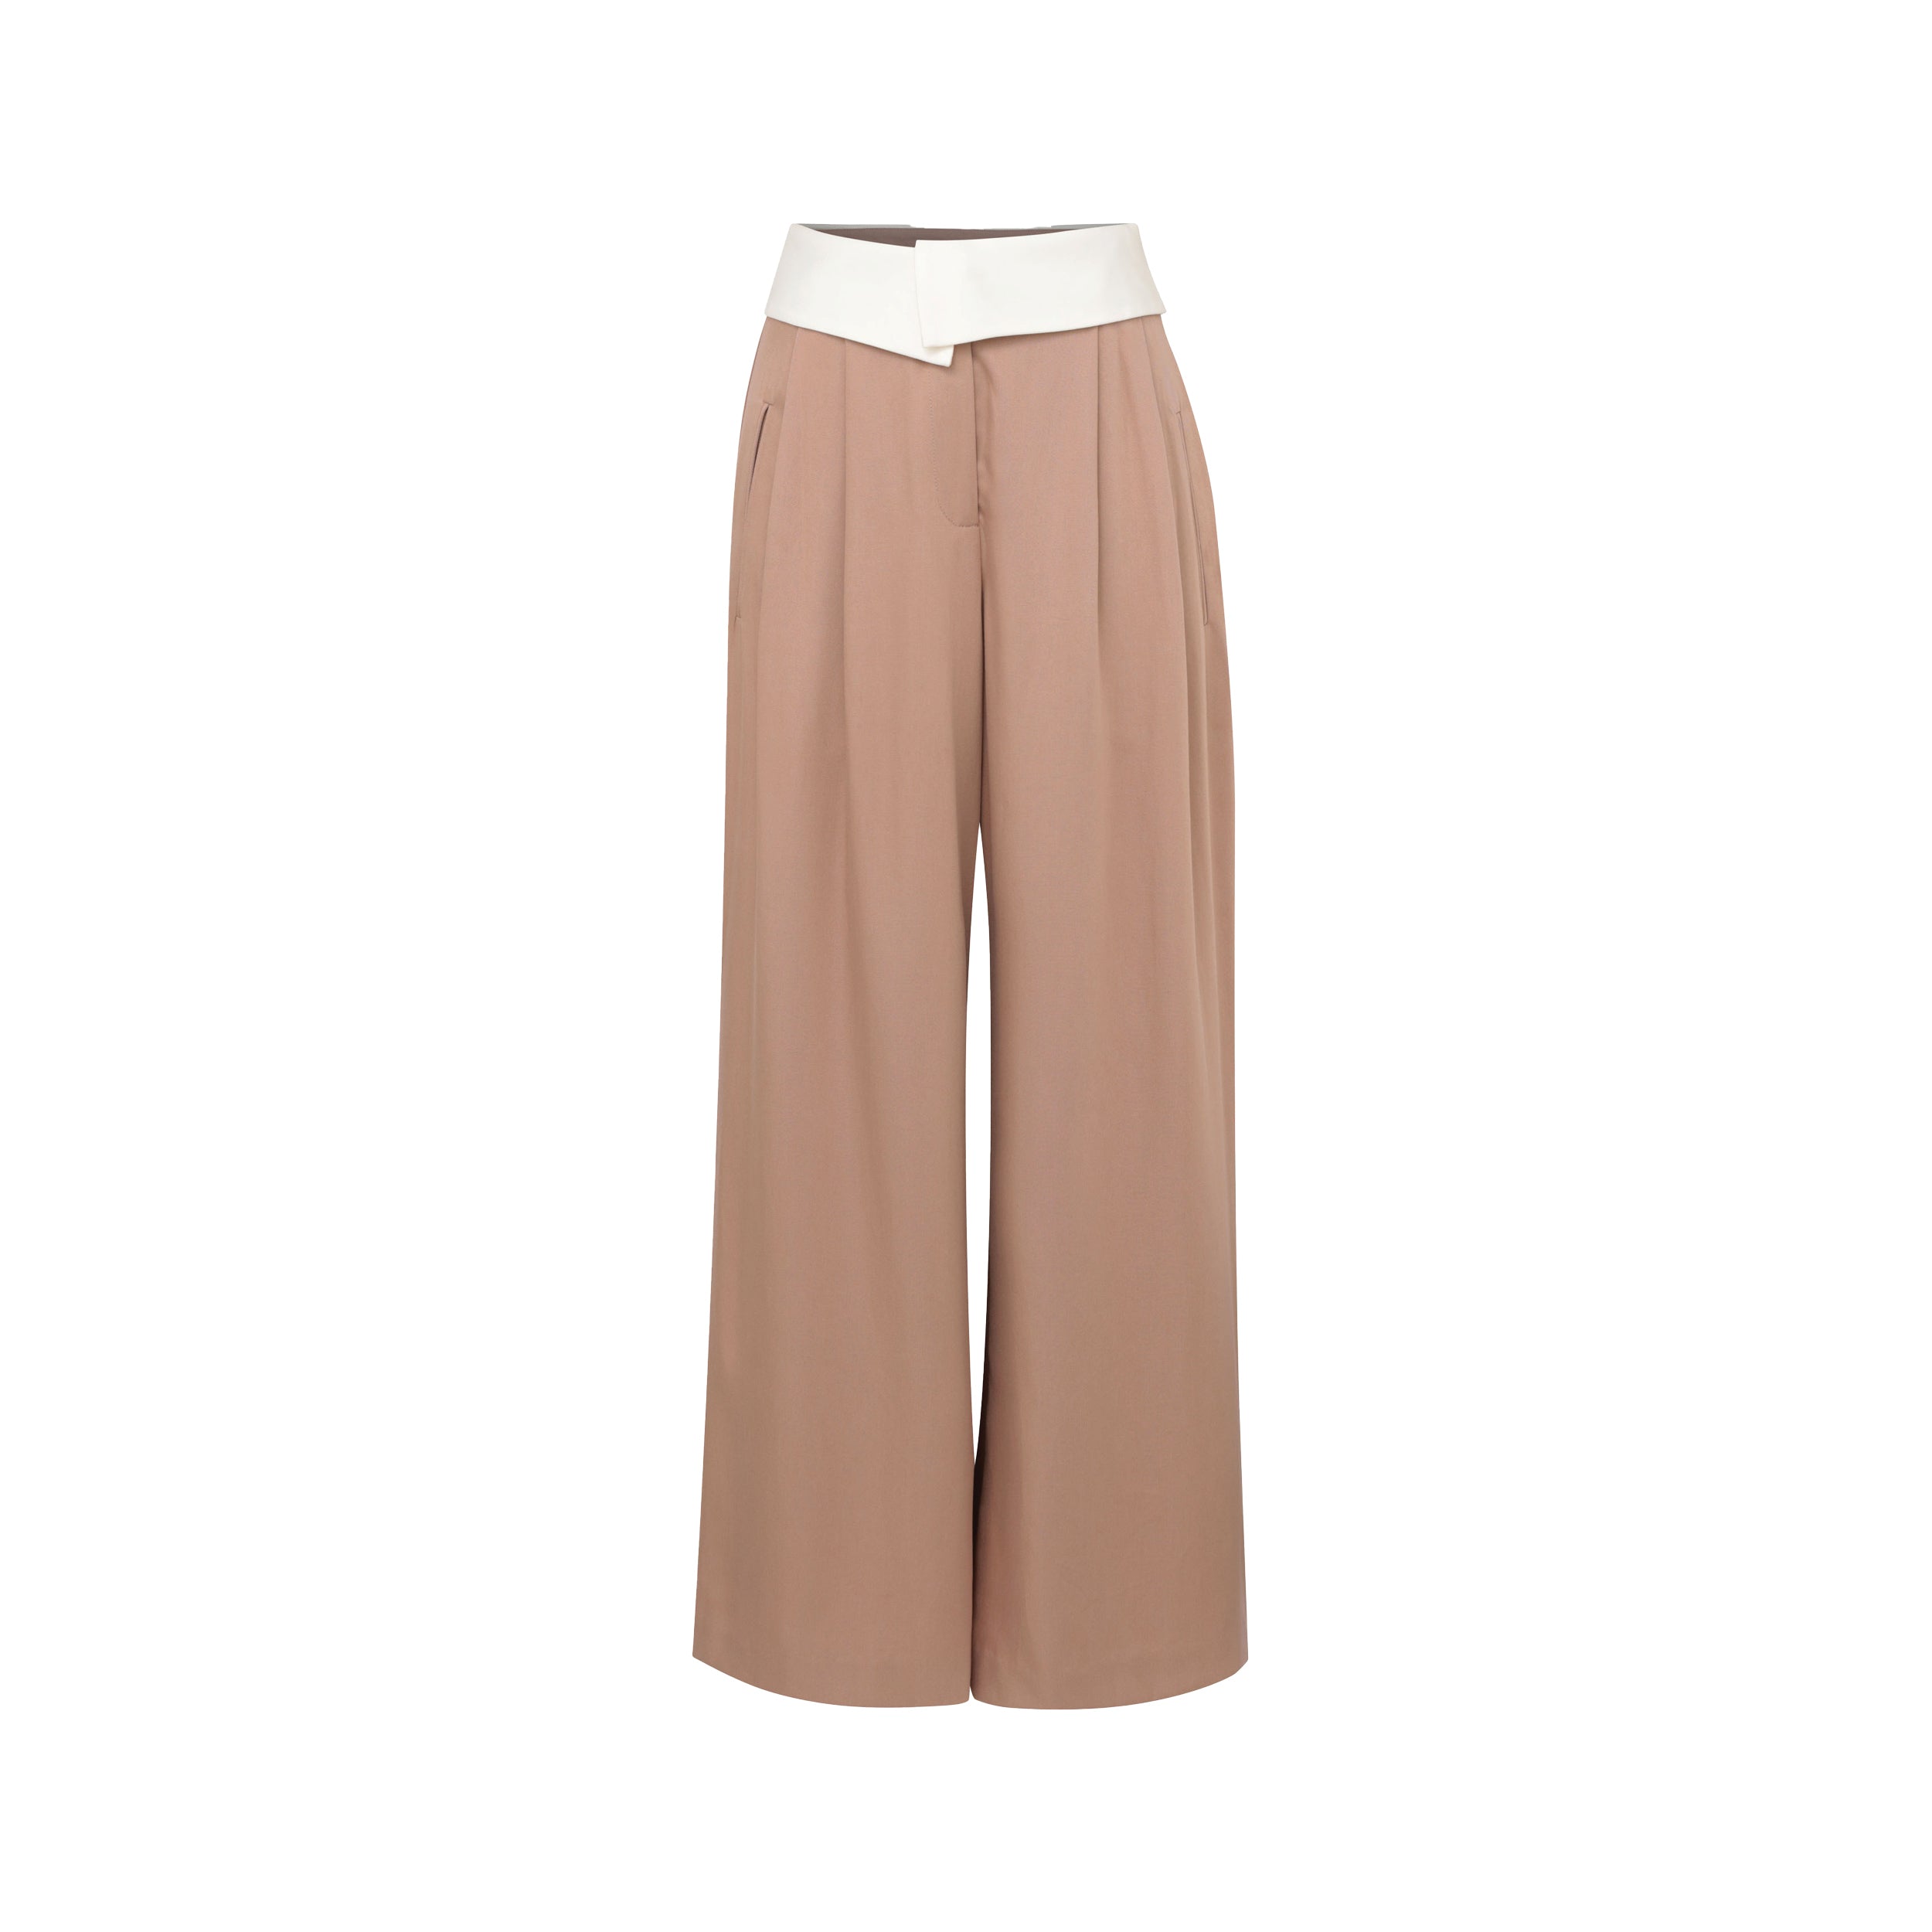 Product view of light brown trousers with white foldover waistband detail.